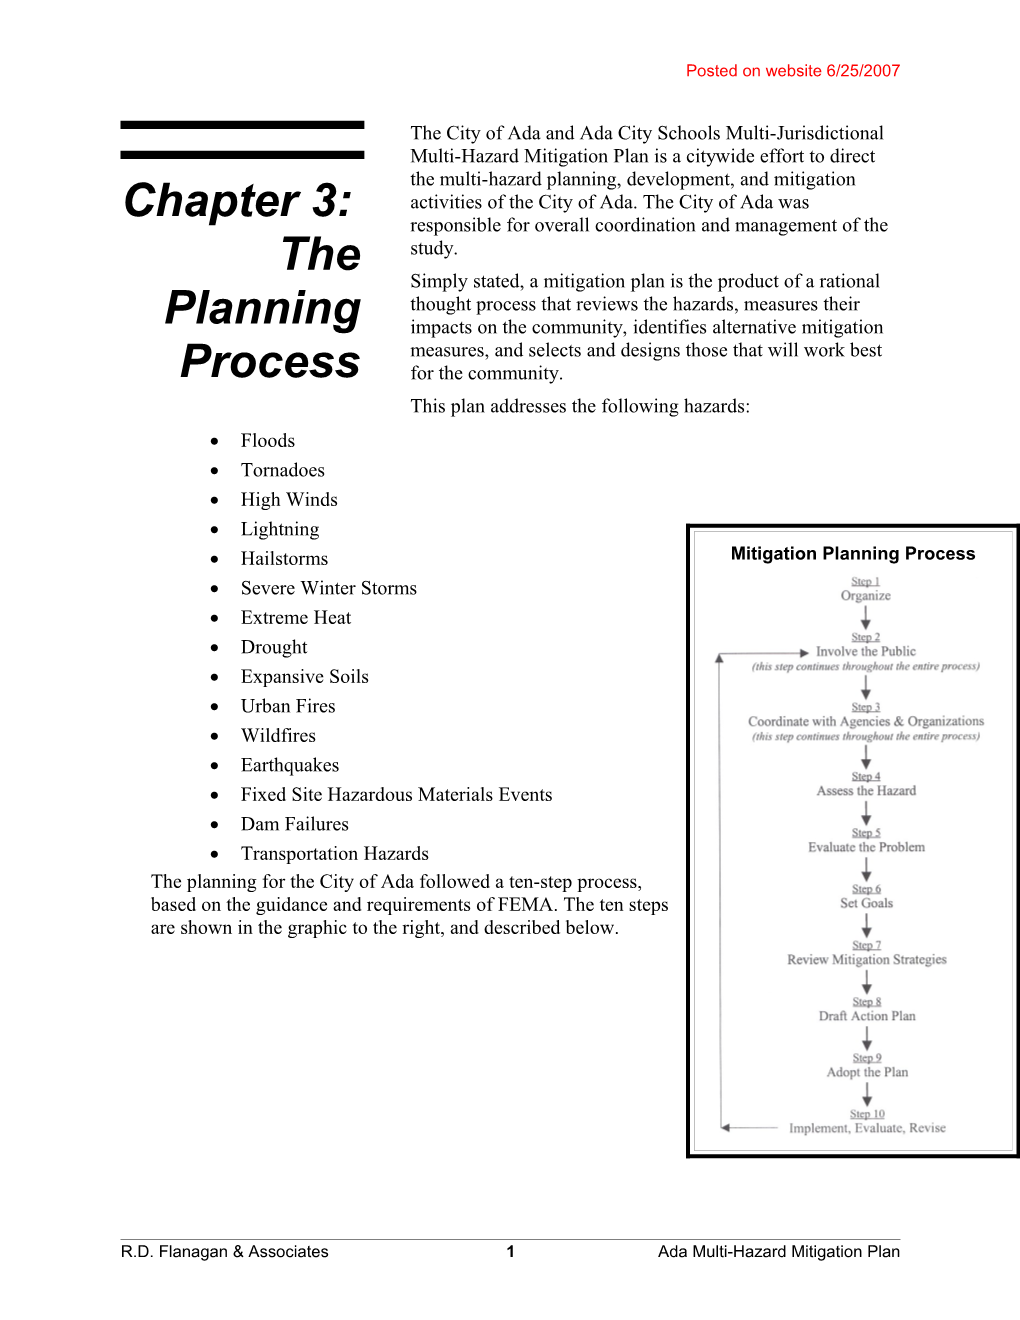 Chapter 3:The Planning Process